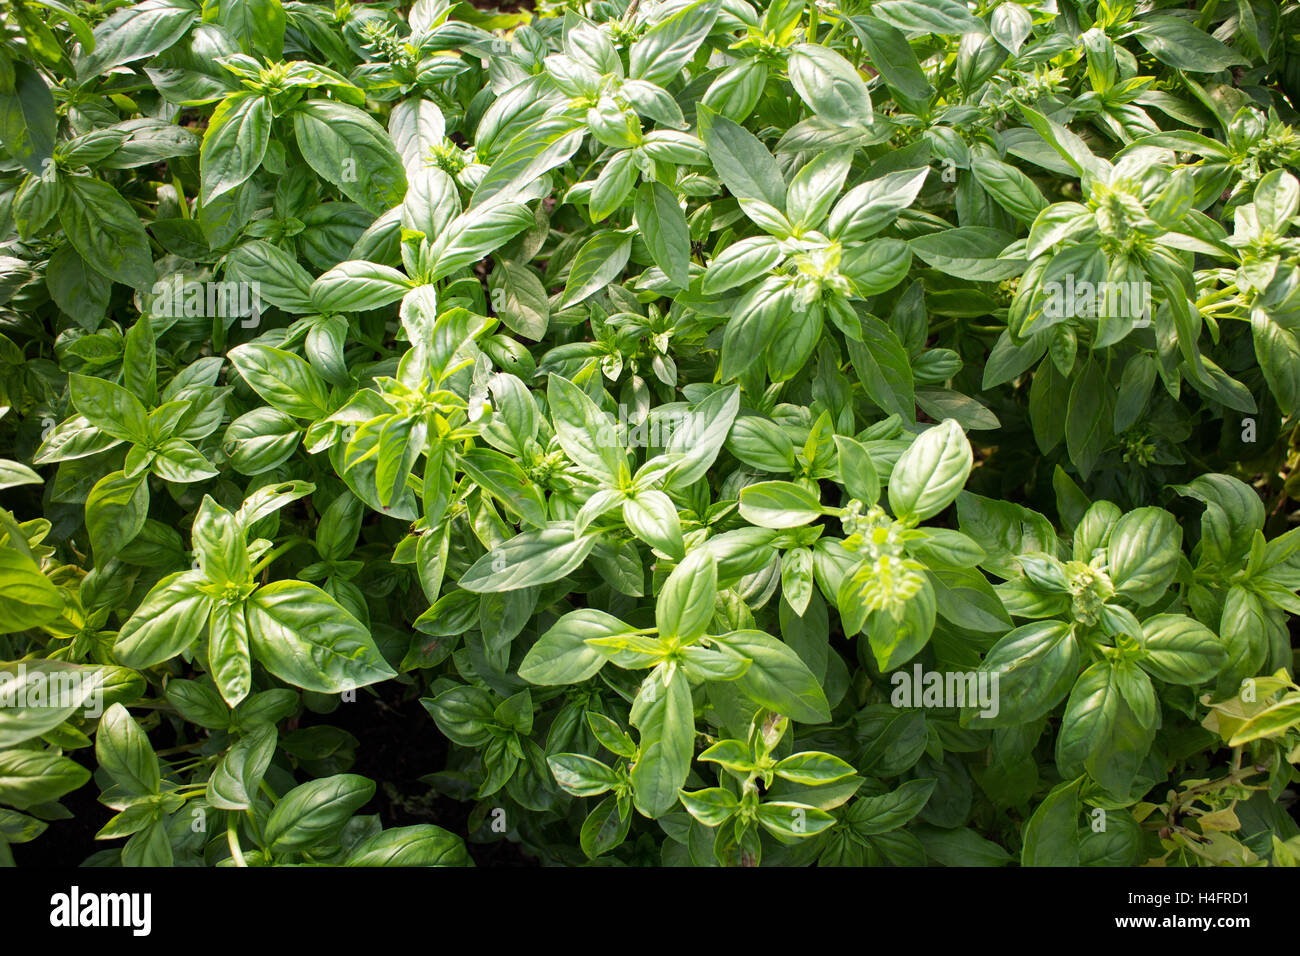 Large mature basil growing and ready to be harvested, food inspired Stock Photo